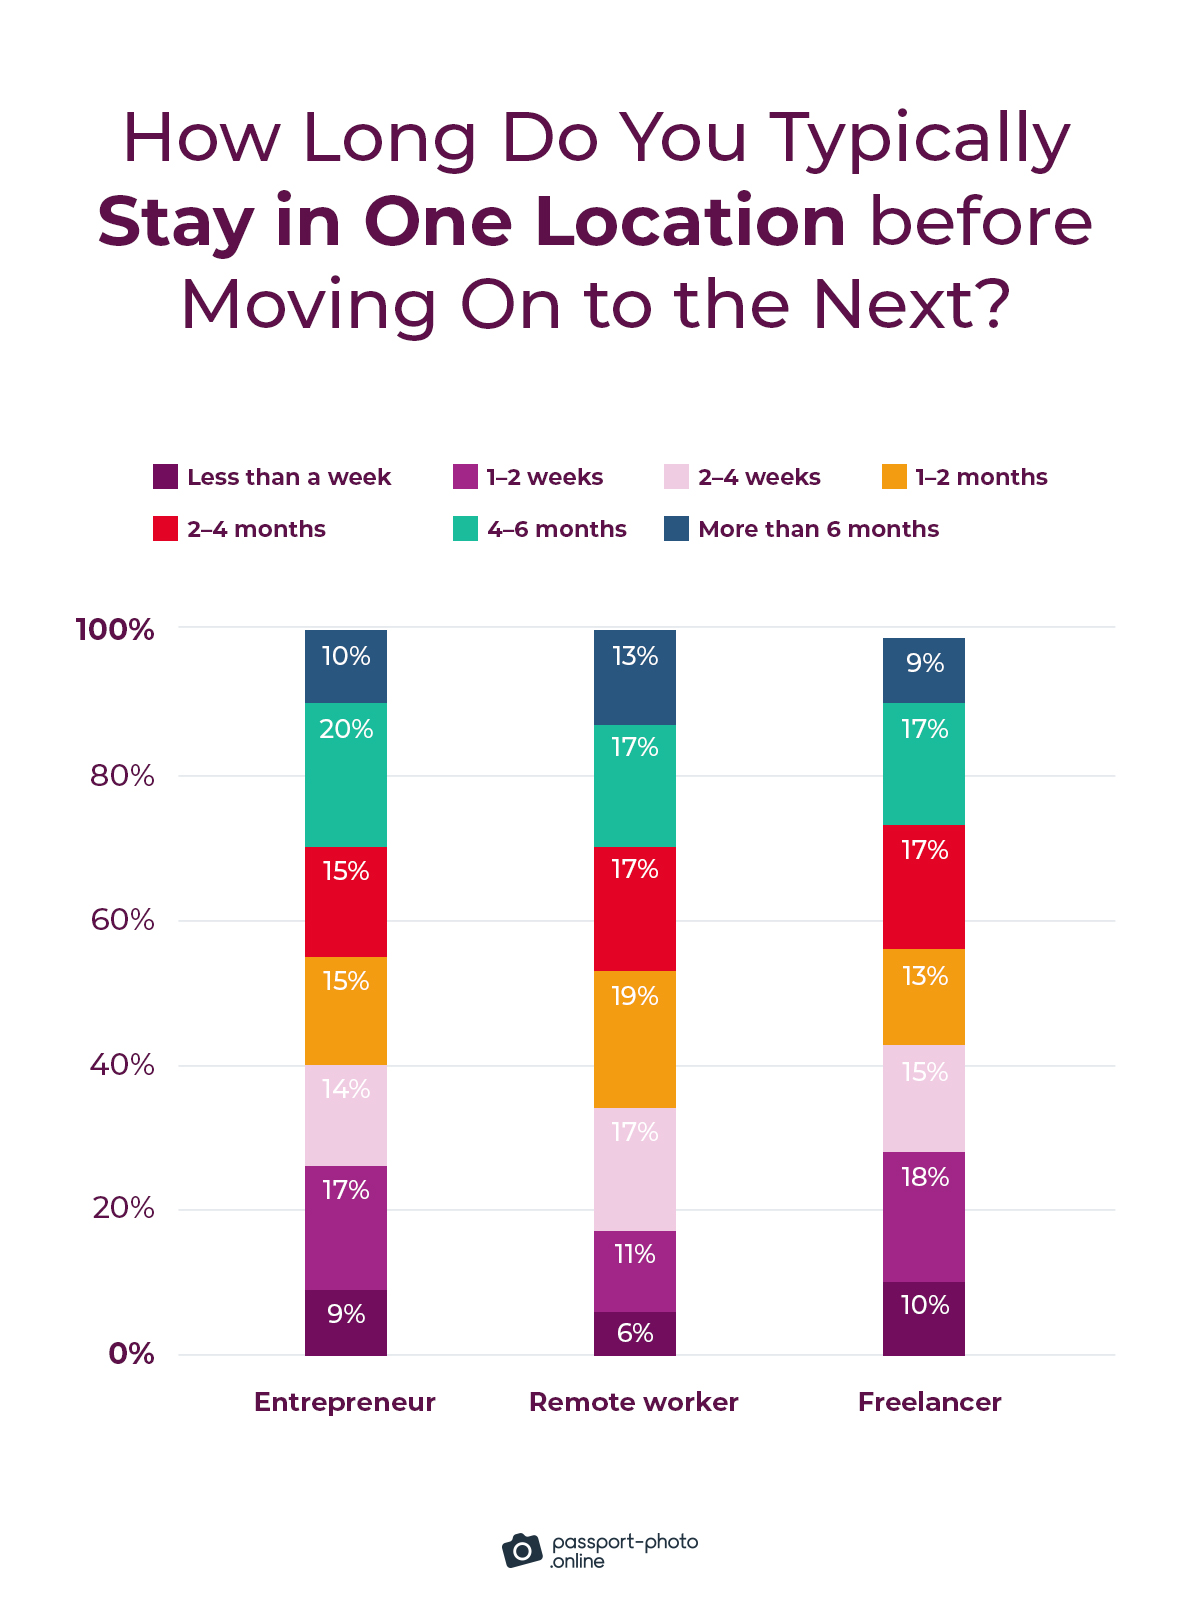 89% of digital nomads stay in one place for up to 6 months